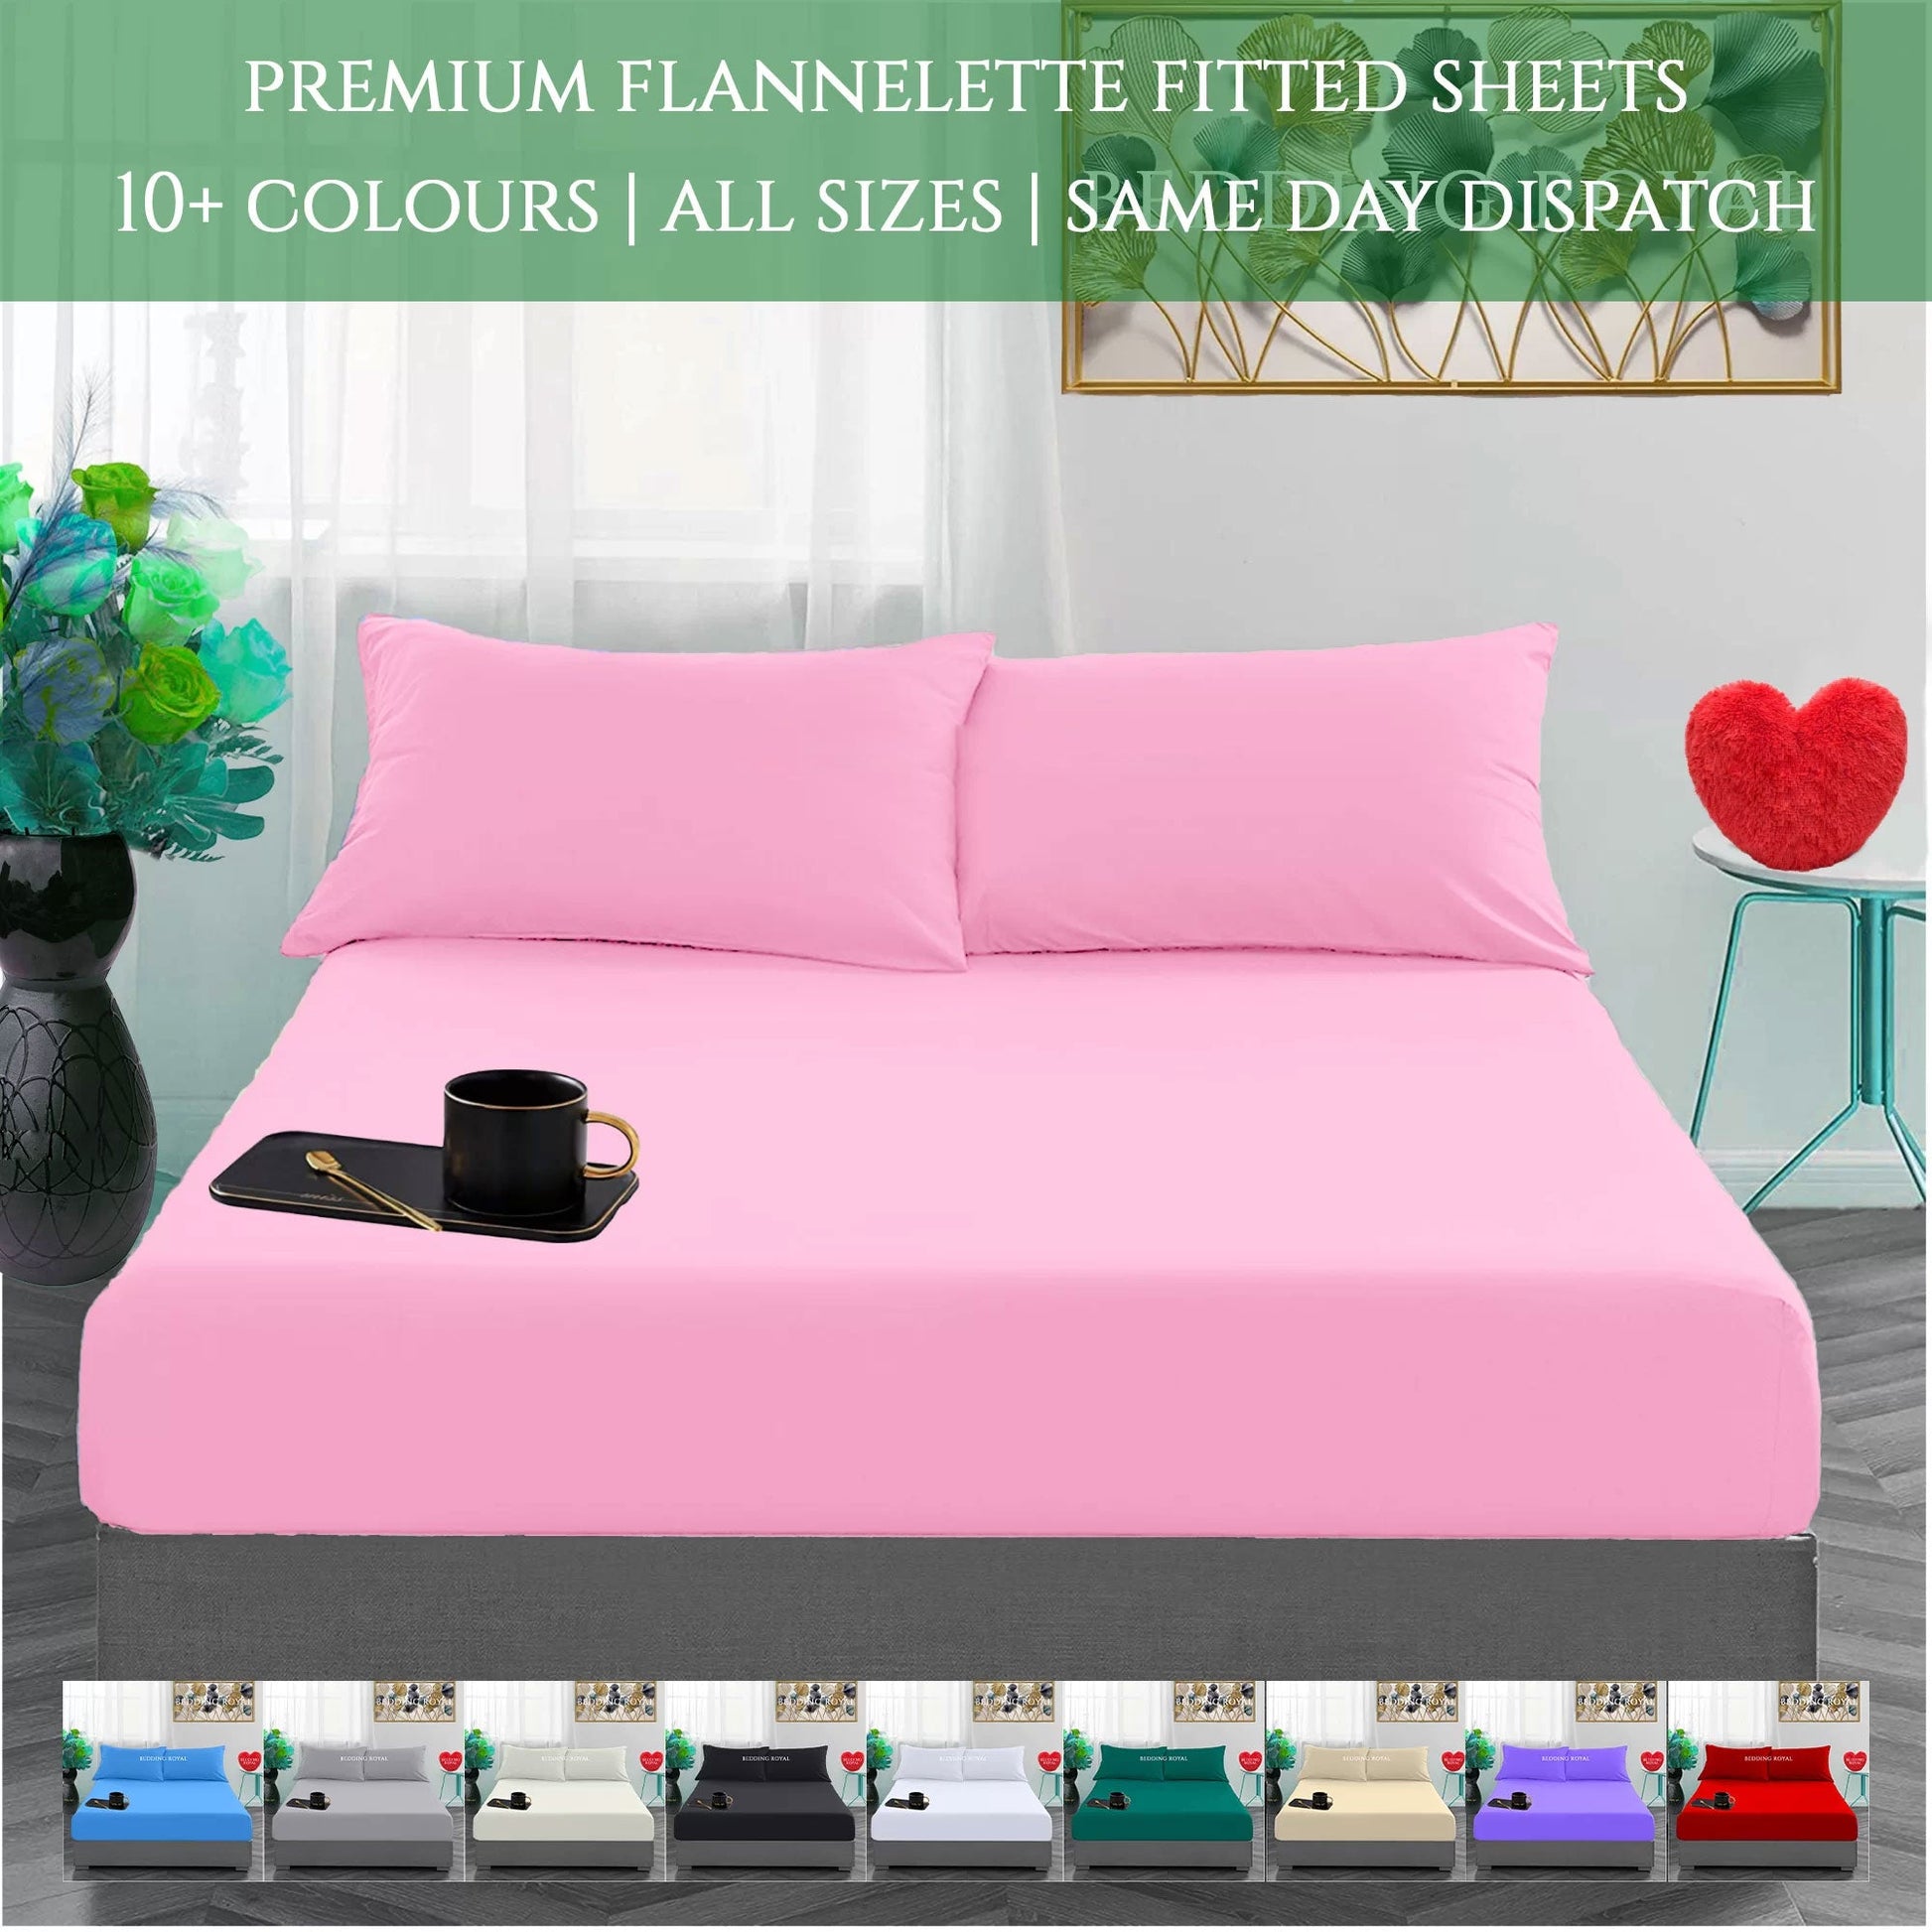 Flannelette Fitted Bed Sheet - TheComfortshop.co.ukBed Sheets0721718965879thecomfortshopTheComfortshop.co.ukFlannelette Pillowcase BlackBlackPillowcase Pair OnlyFlannelette Fitted Bed Sheet - TheComfortshop.co.uk